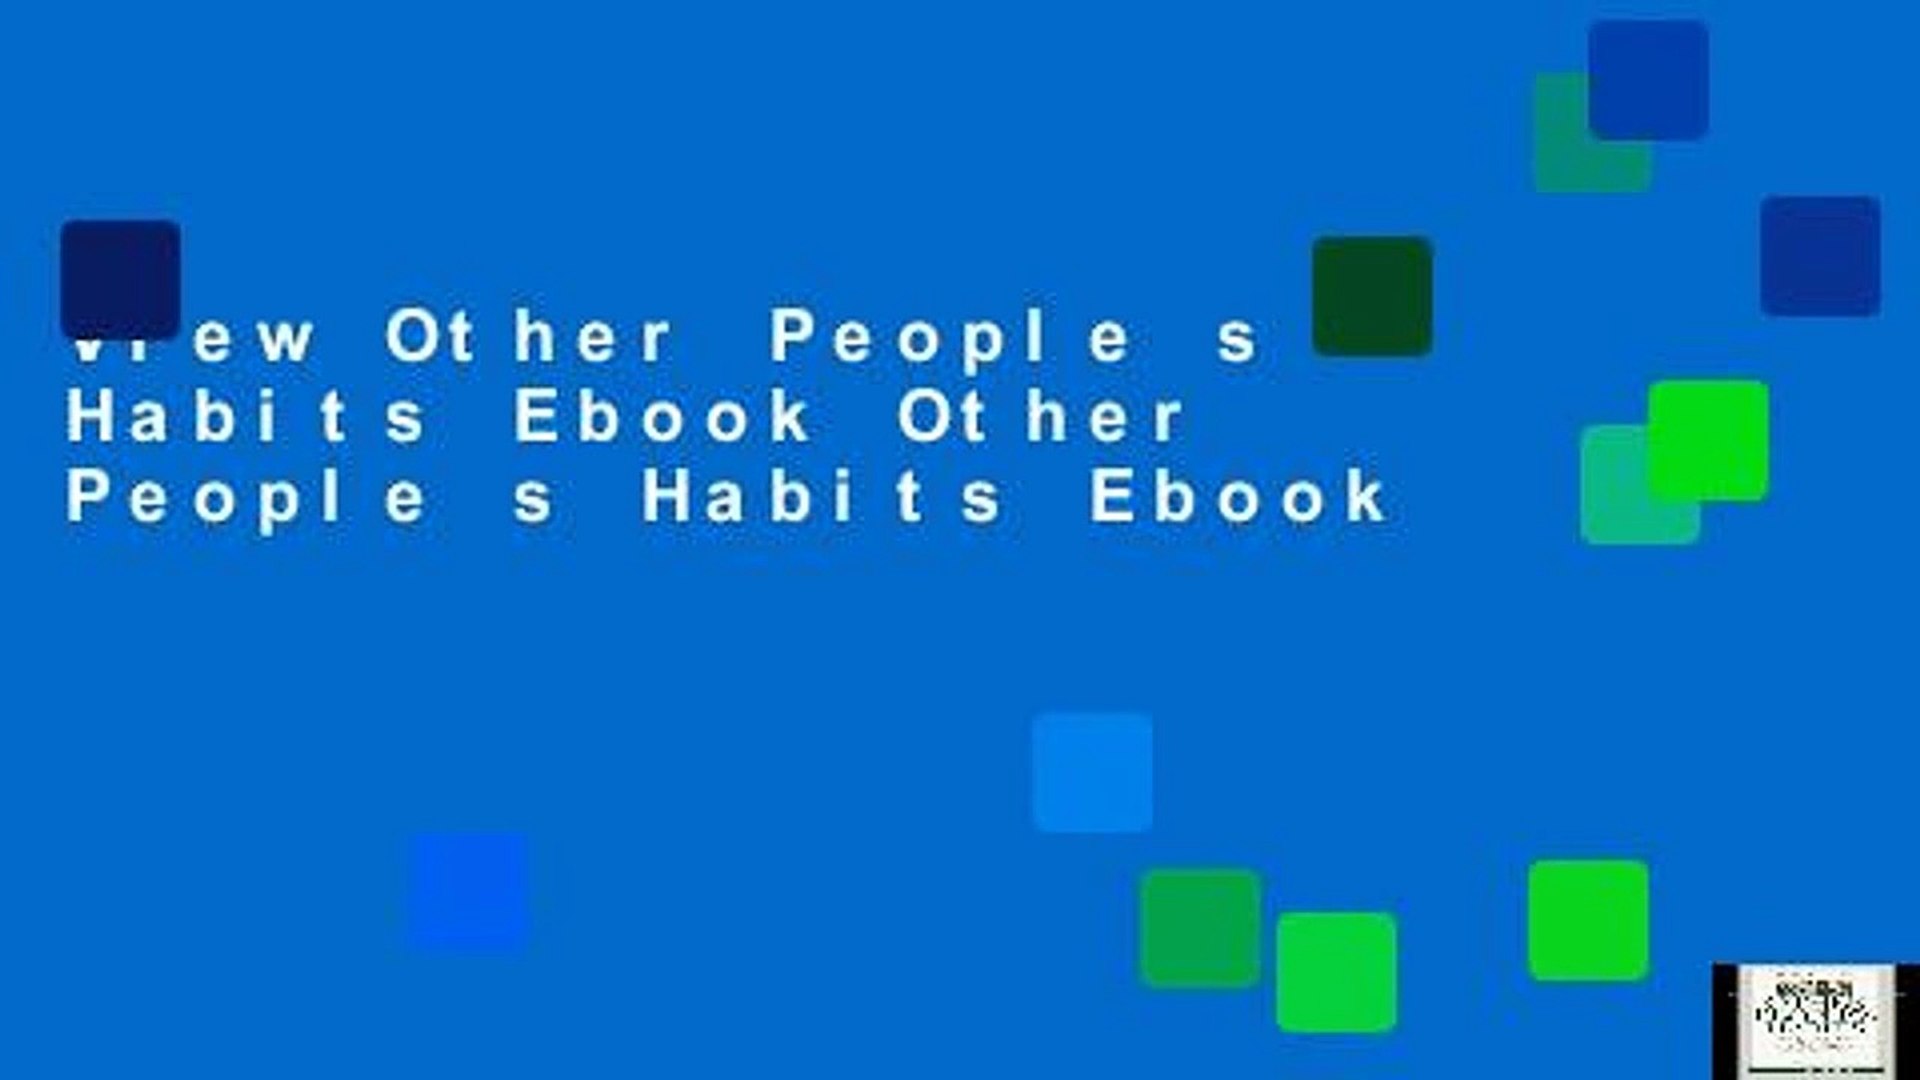 View Other People s Habits Ebook Other People s Habits Ebook